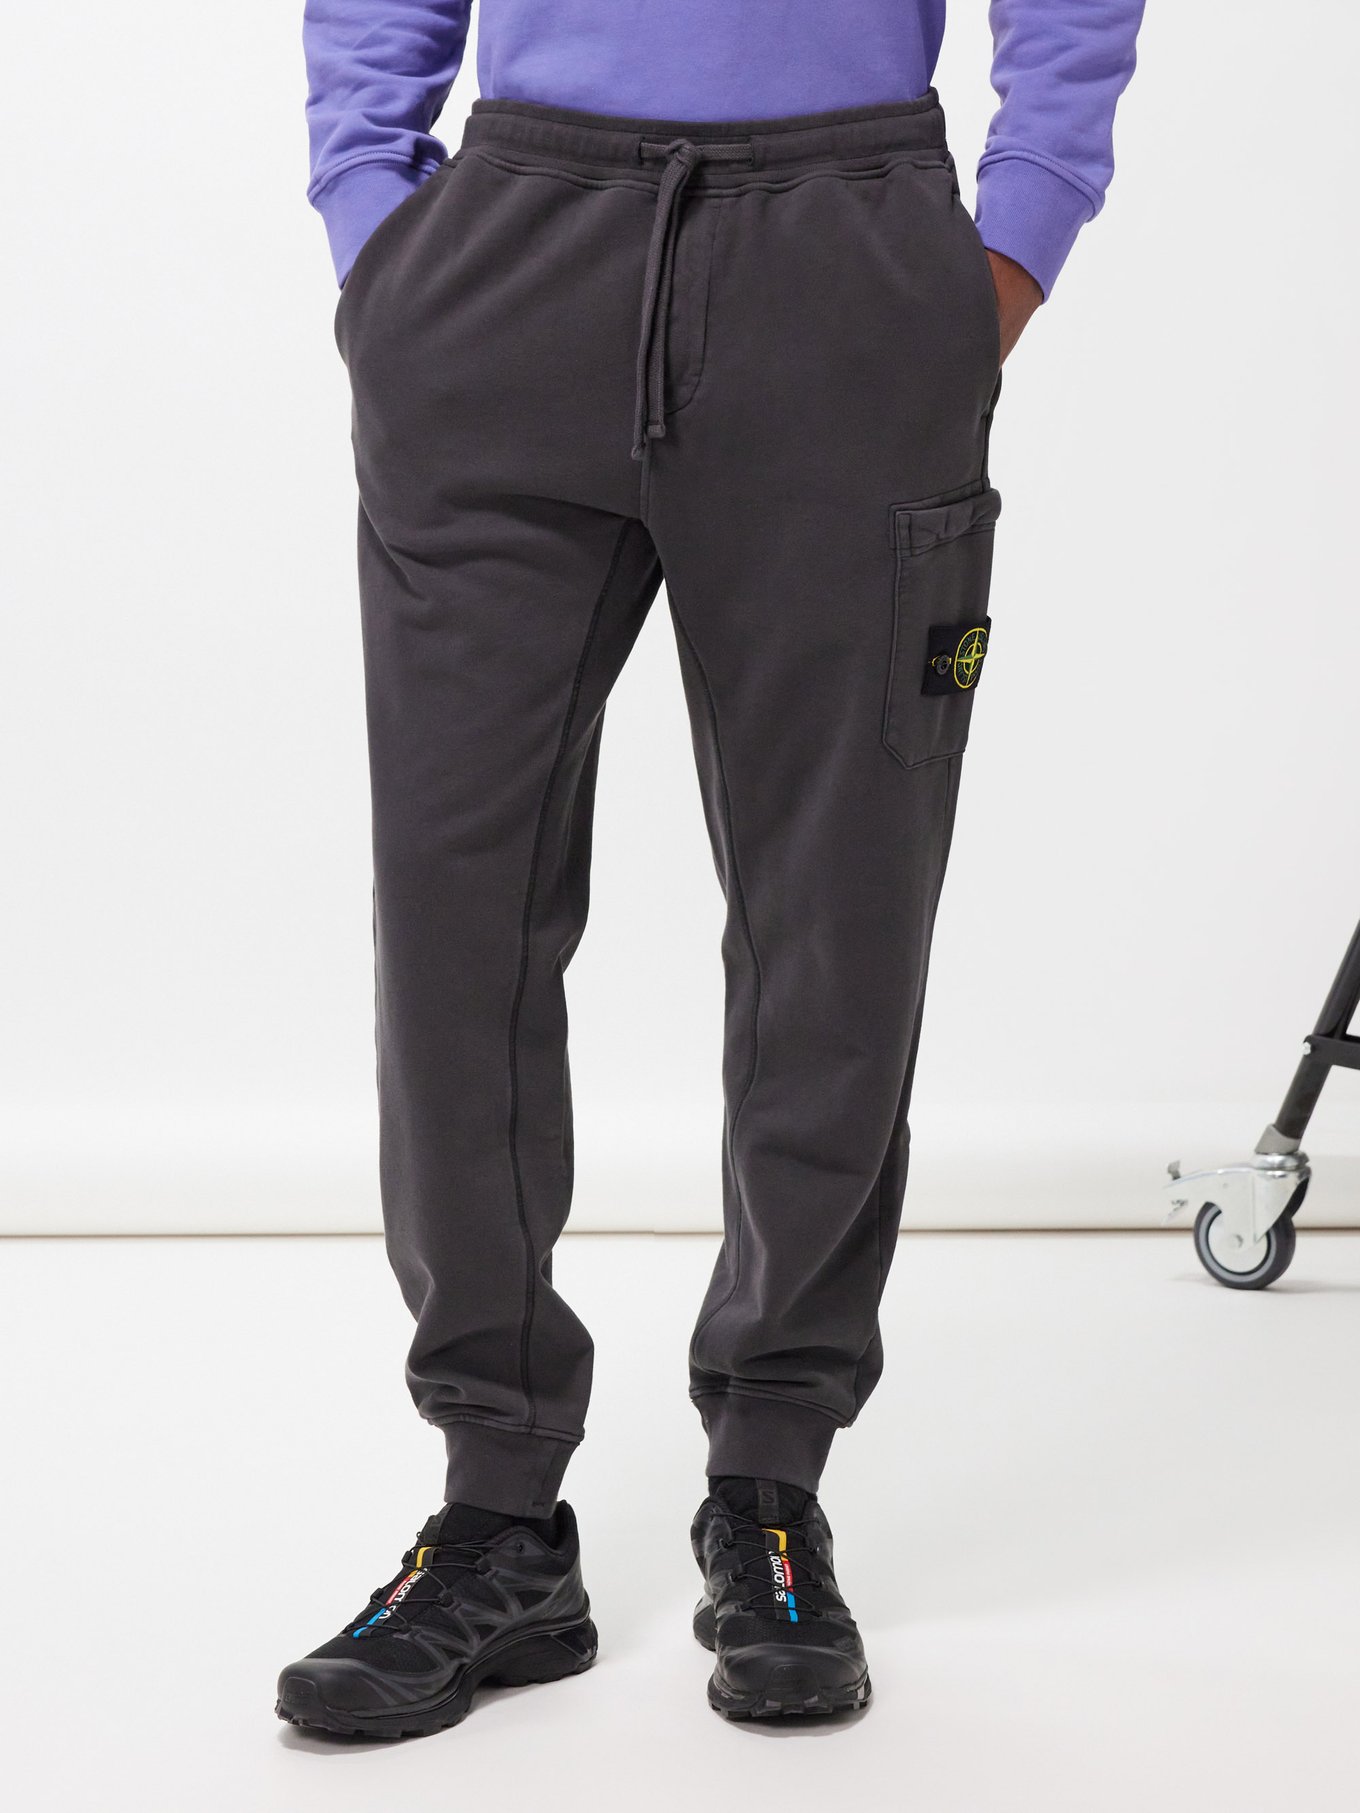 Compass track pants in black - Stone Island